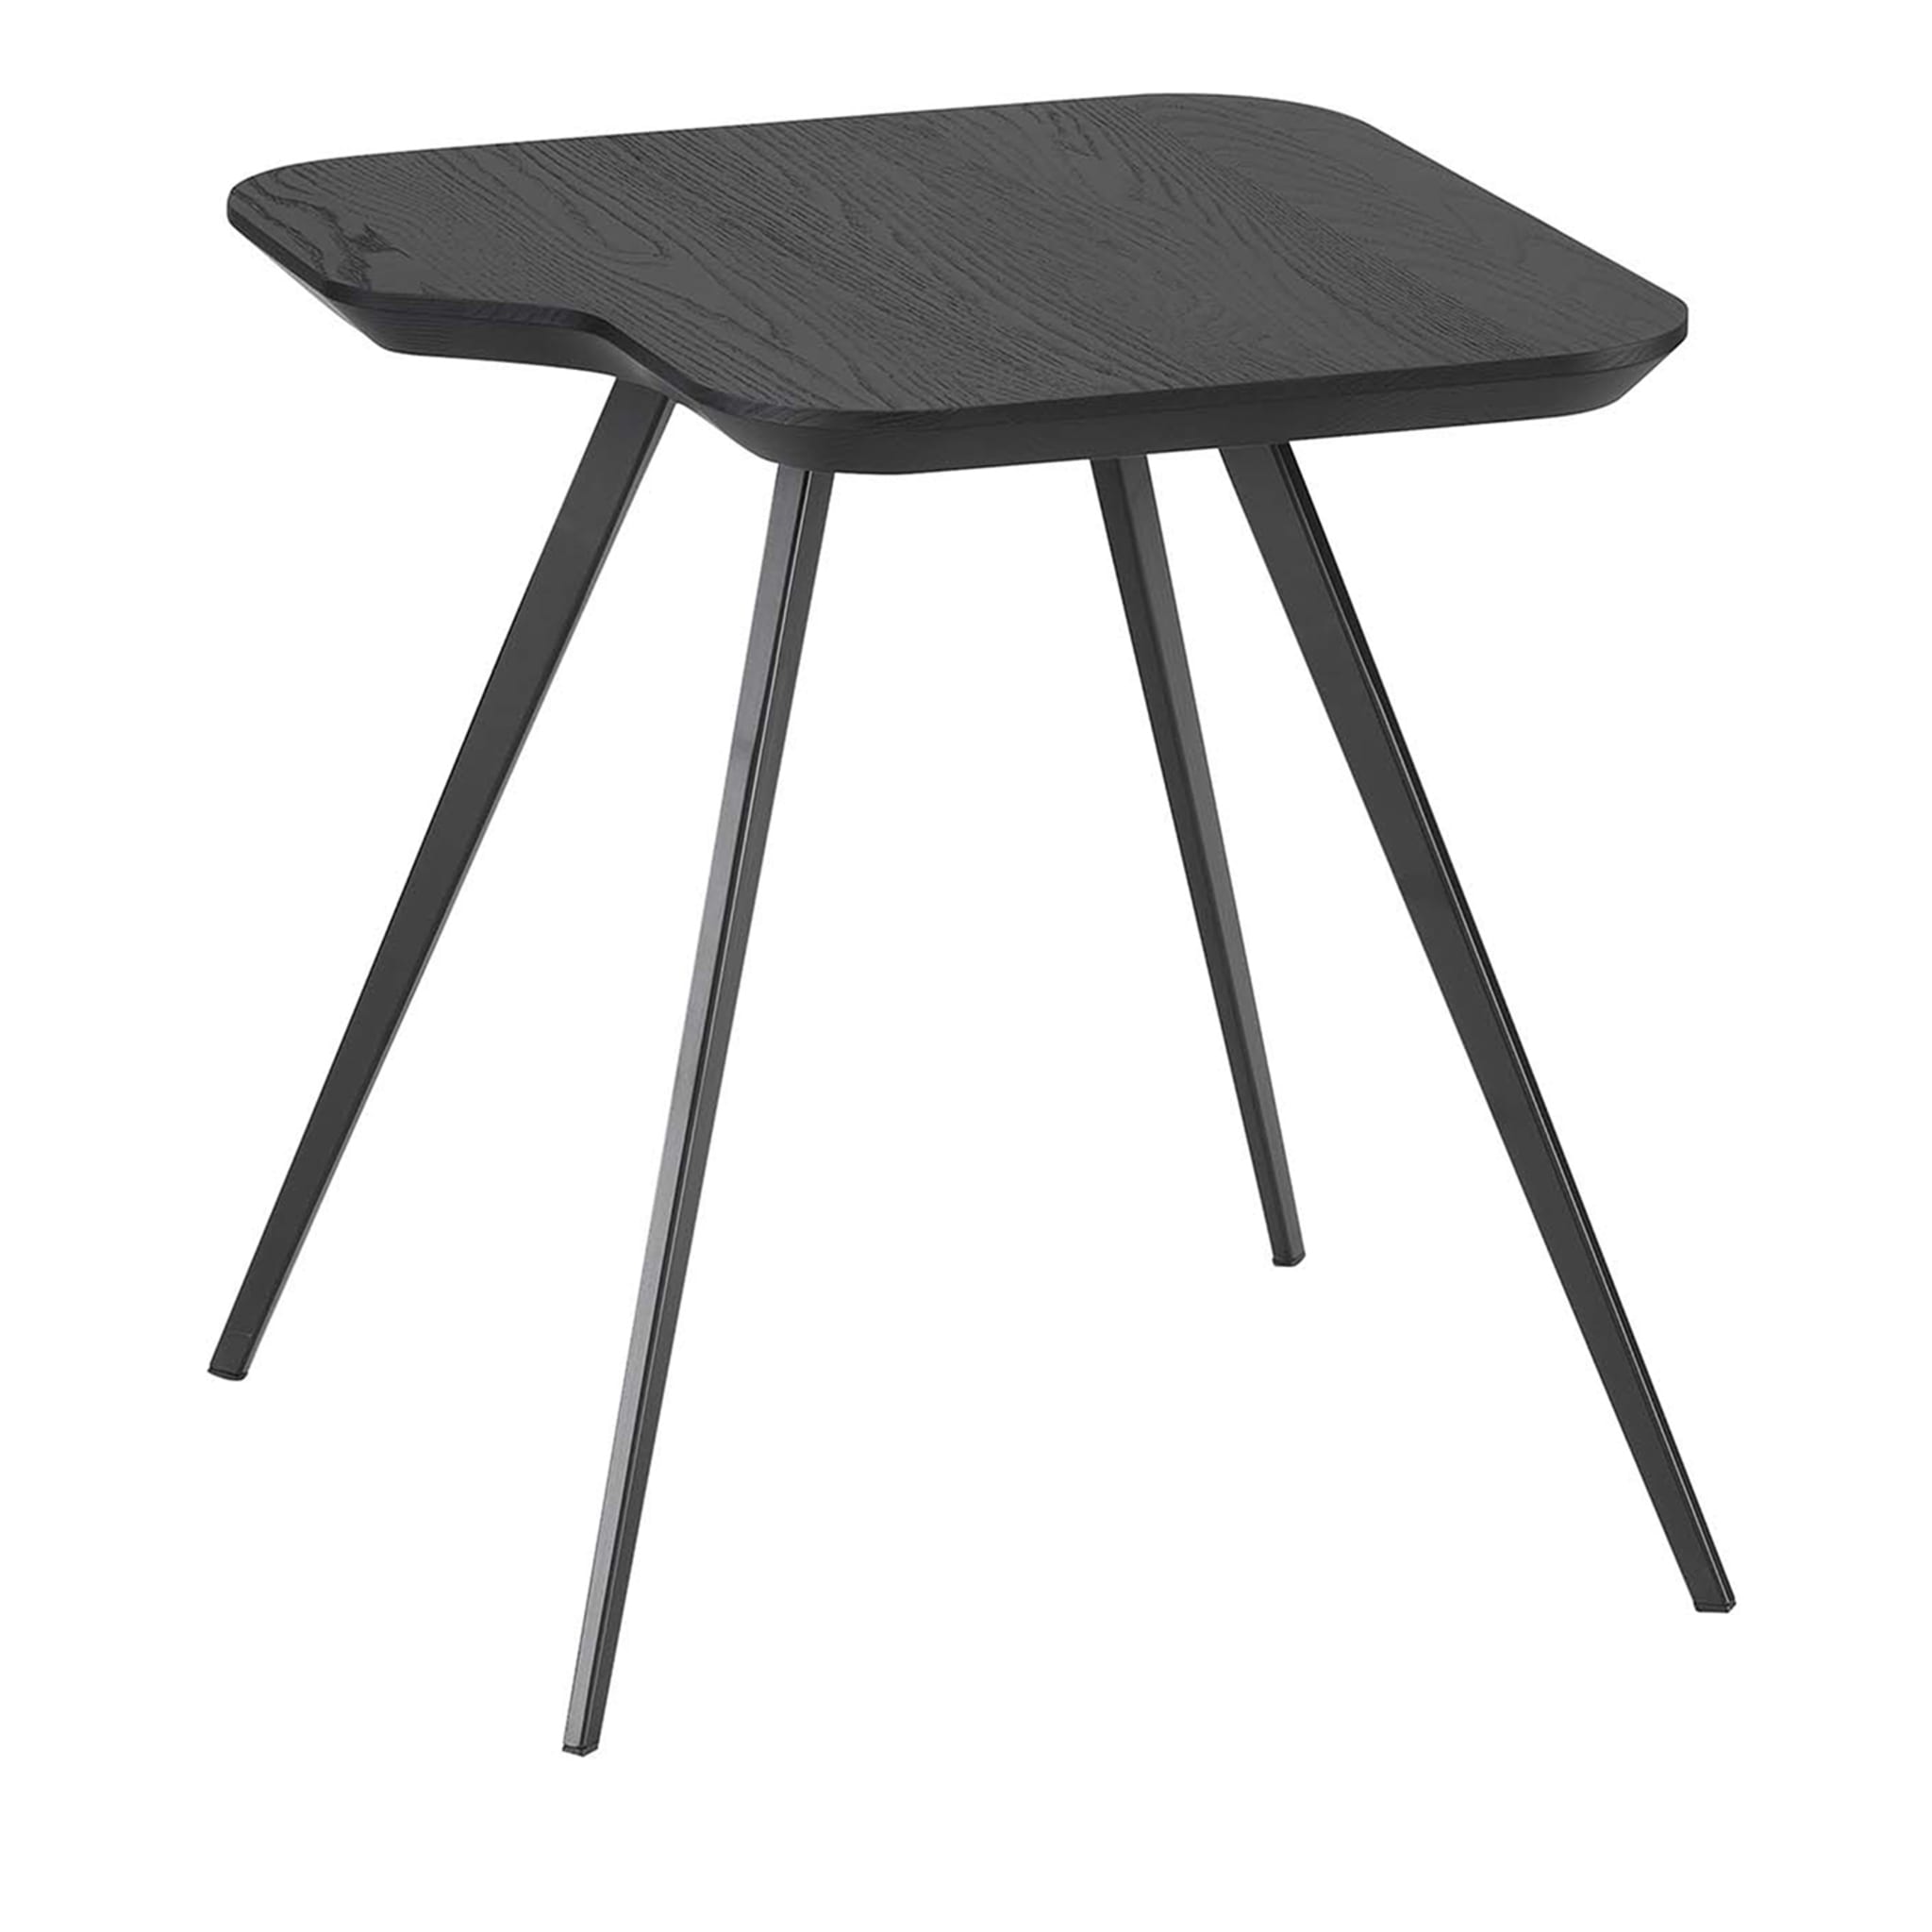 Aky Small Black Side Table by Emilio Nanni - Main view